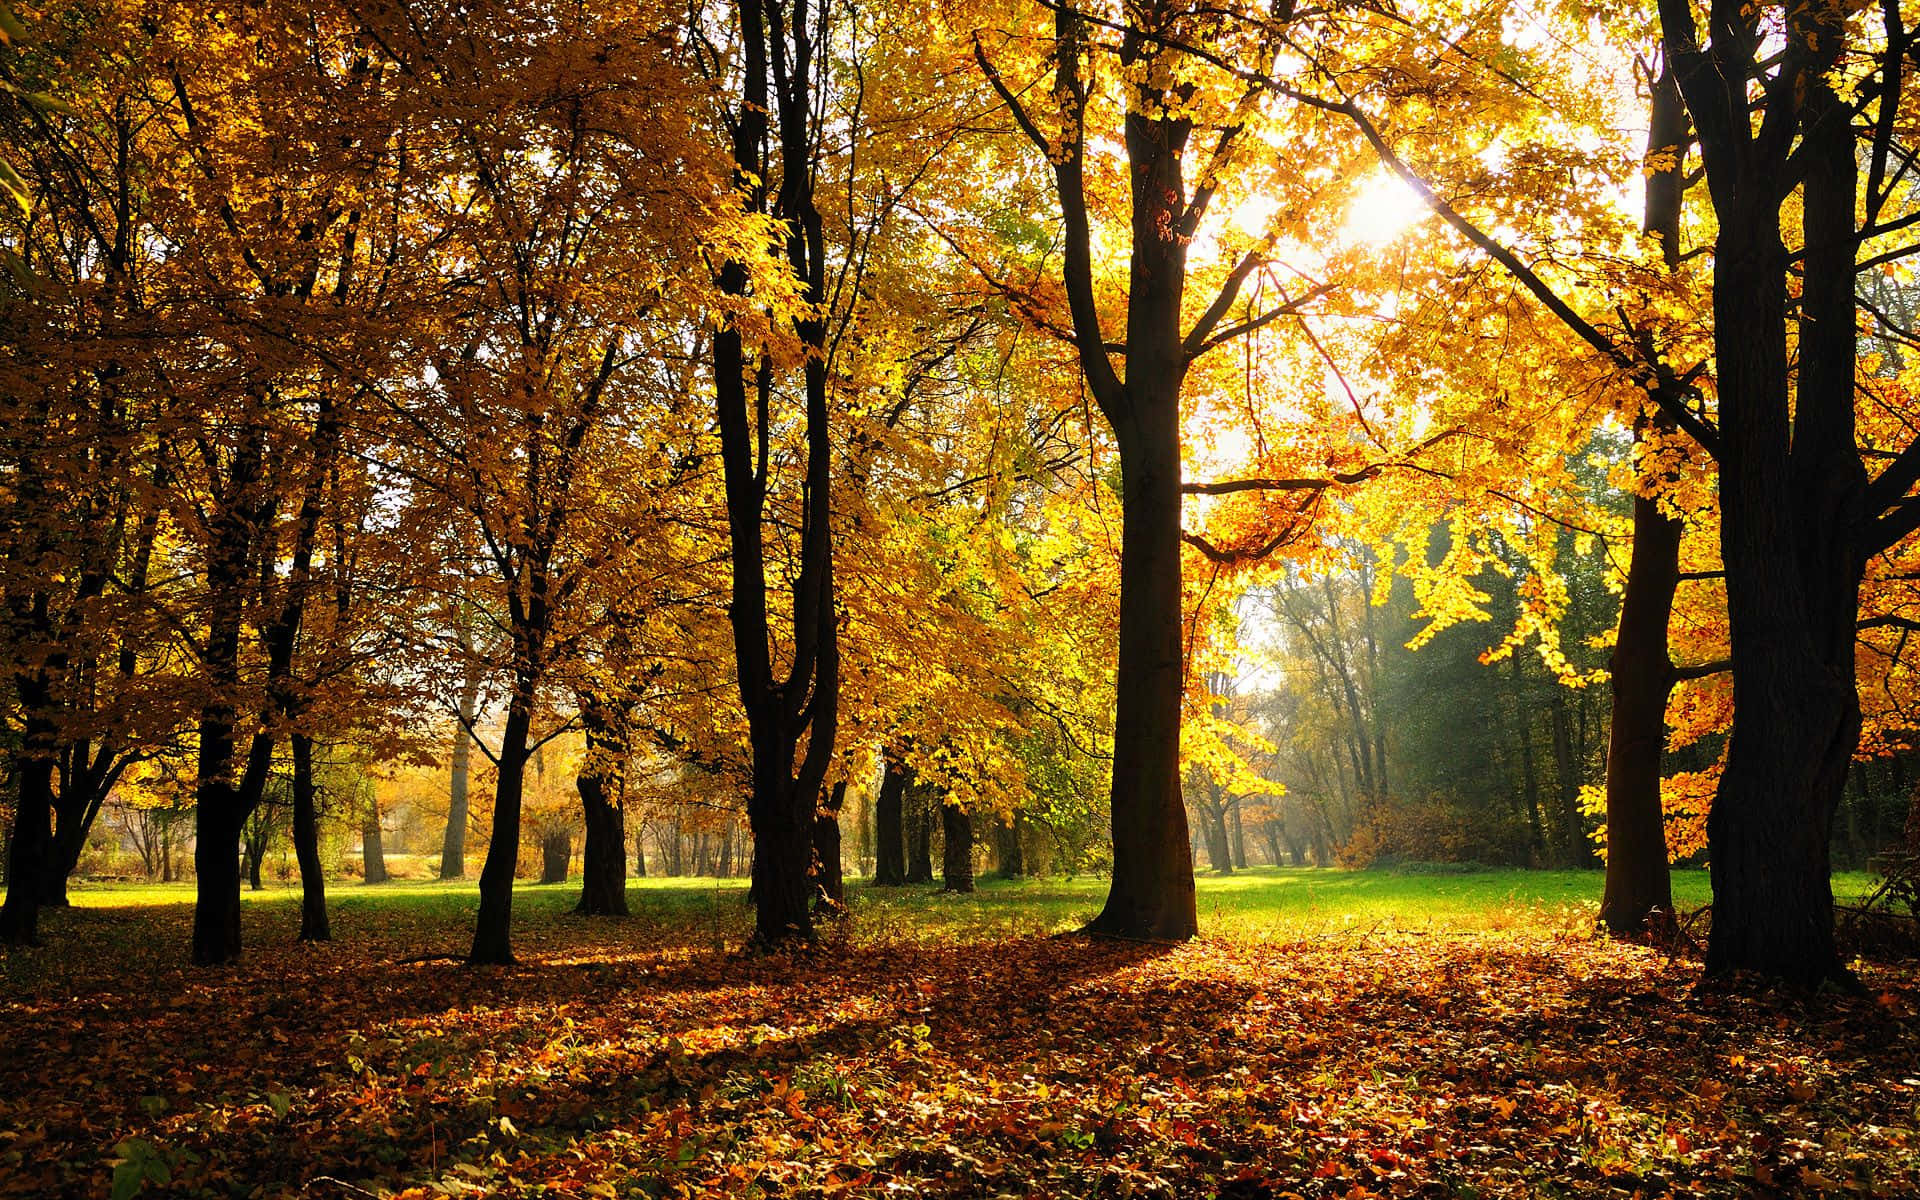 "Welcome the Alluring Colors of November Fall" Wallpaper